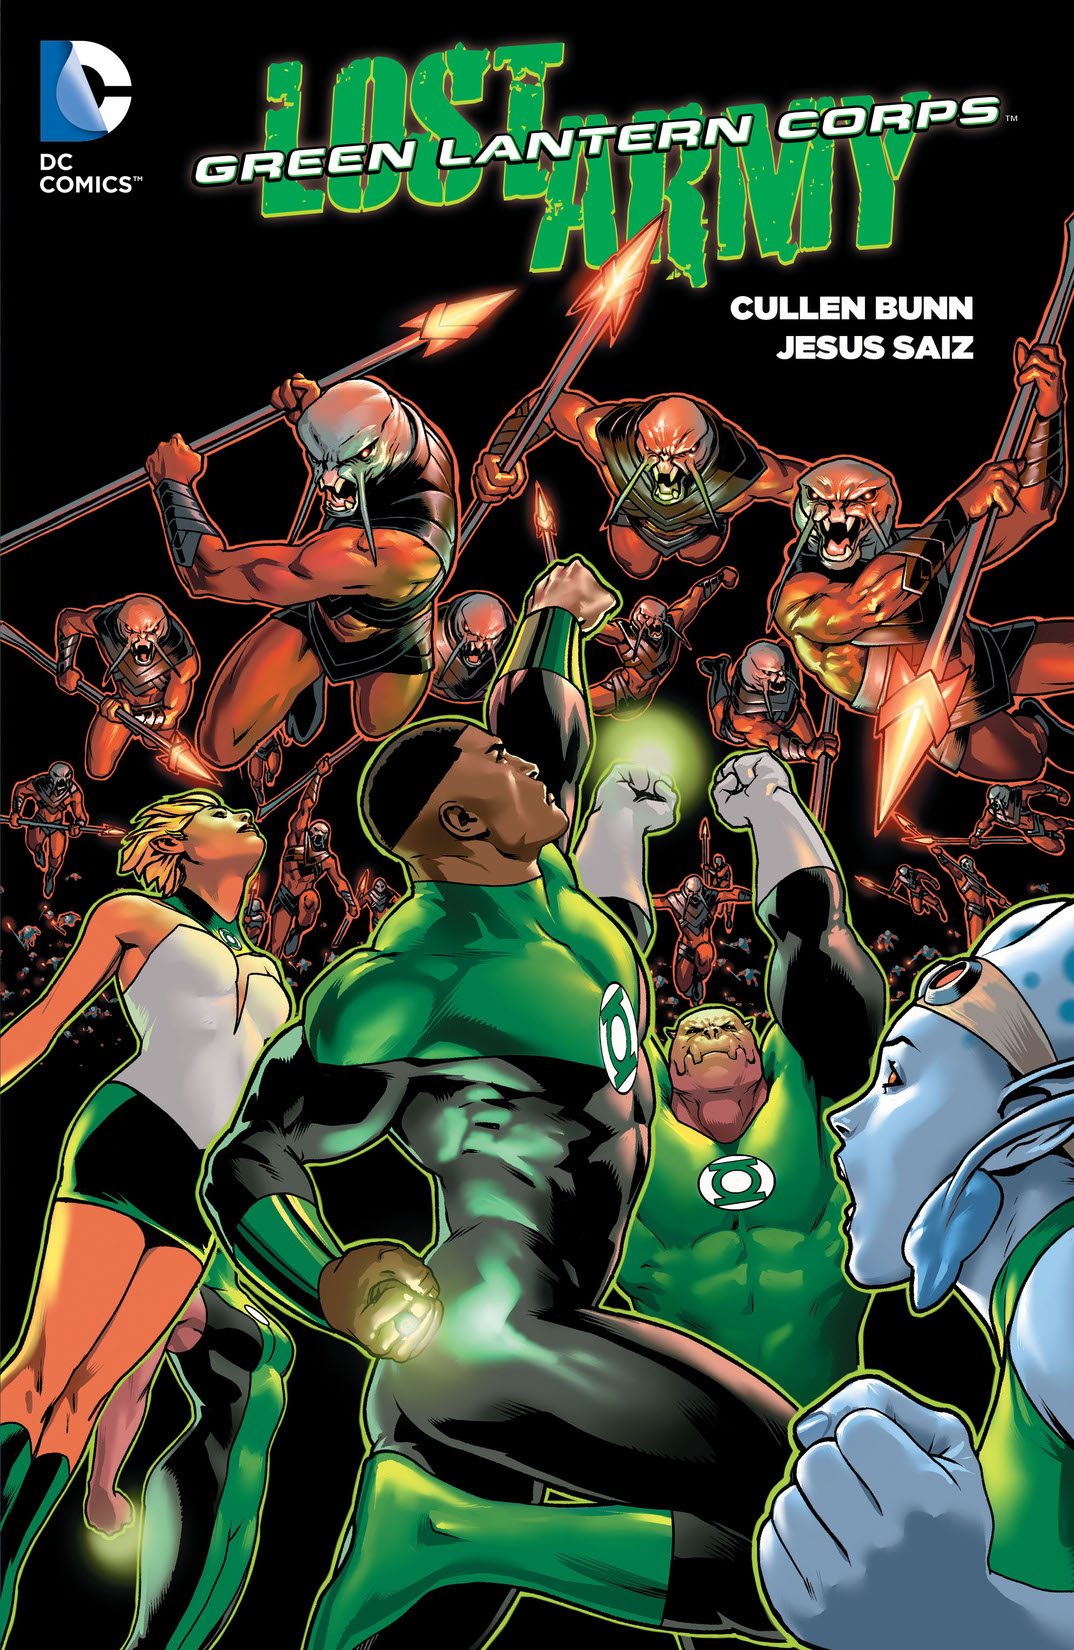 Green Lantern Corps: Lost Army Vol. 1 preview images